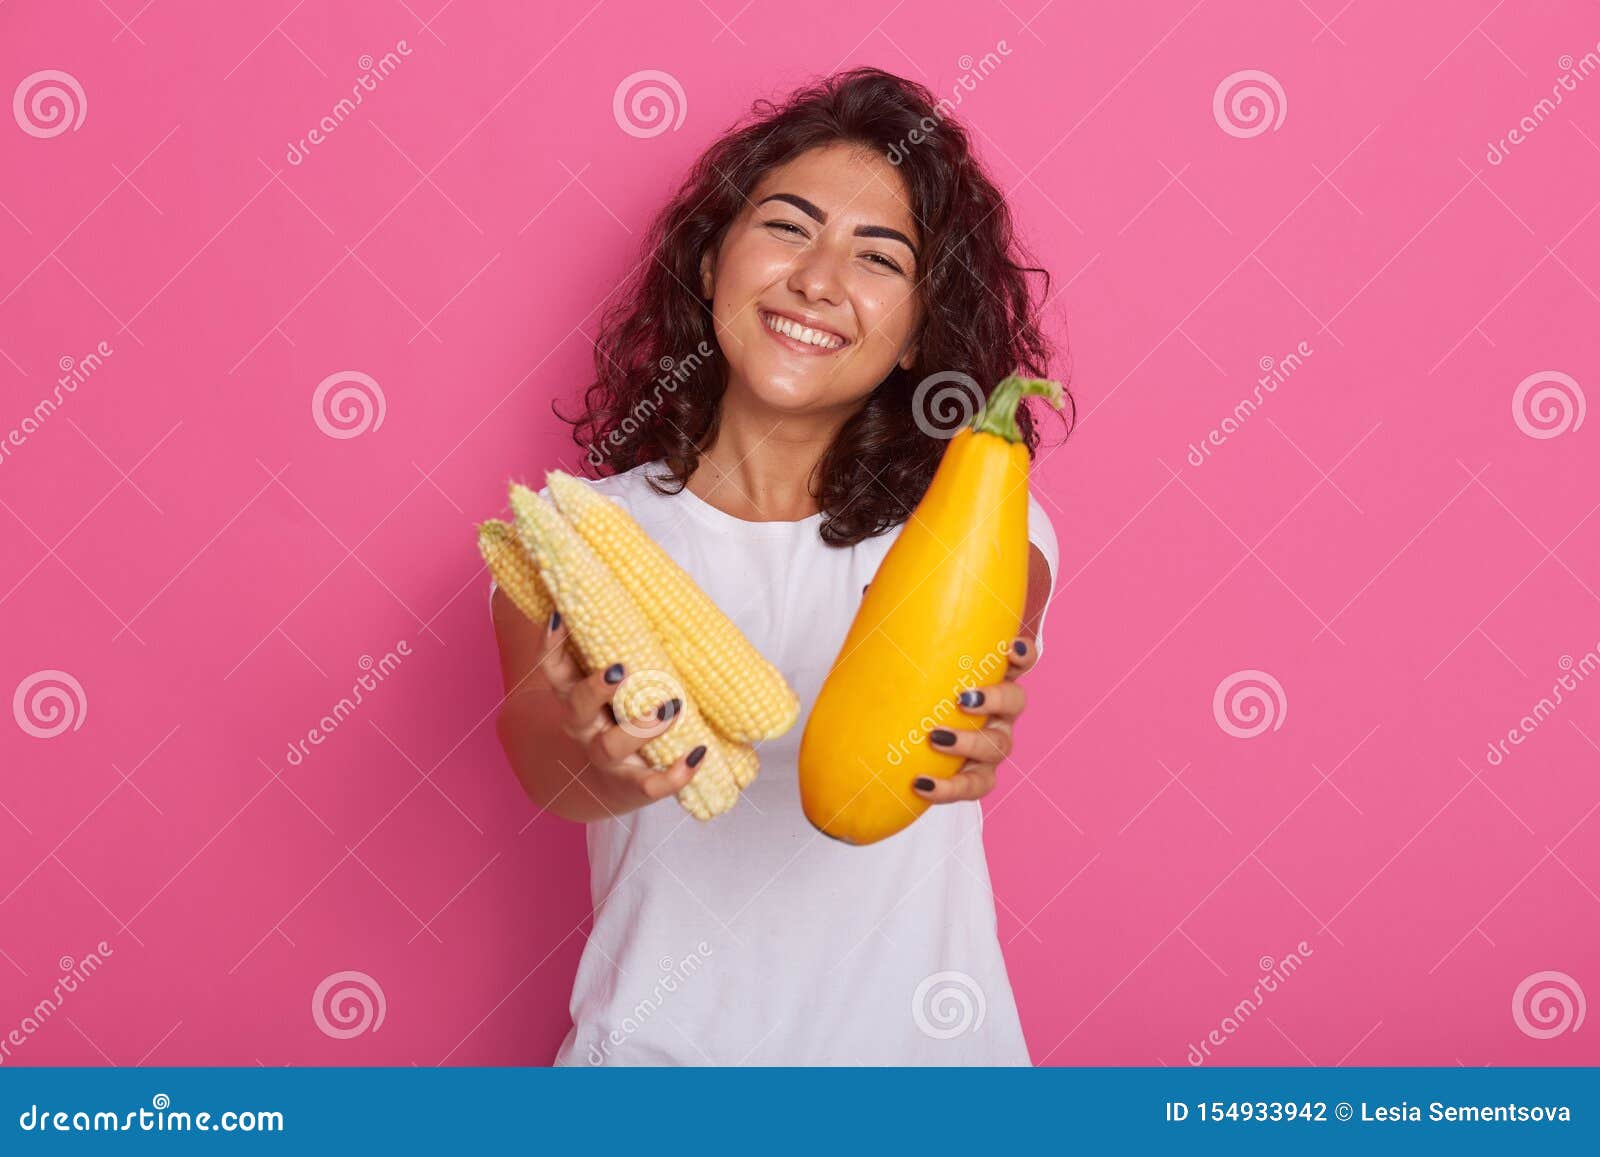 cropped image of young woman dressed in white casual t shirt showing zucchini and corncob to camera, has happy facial expresion,